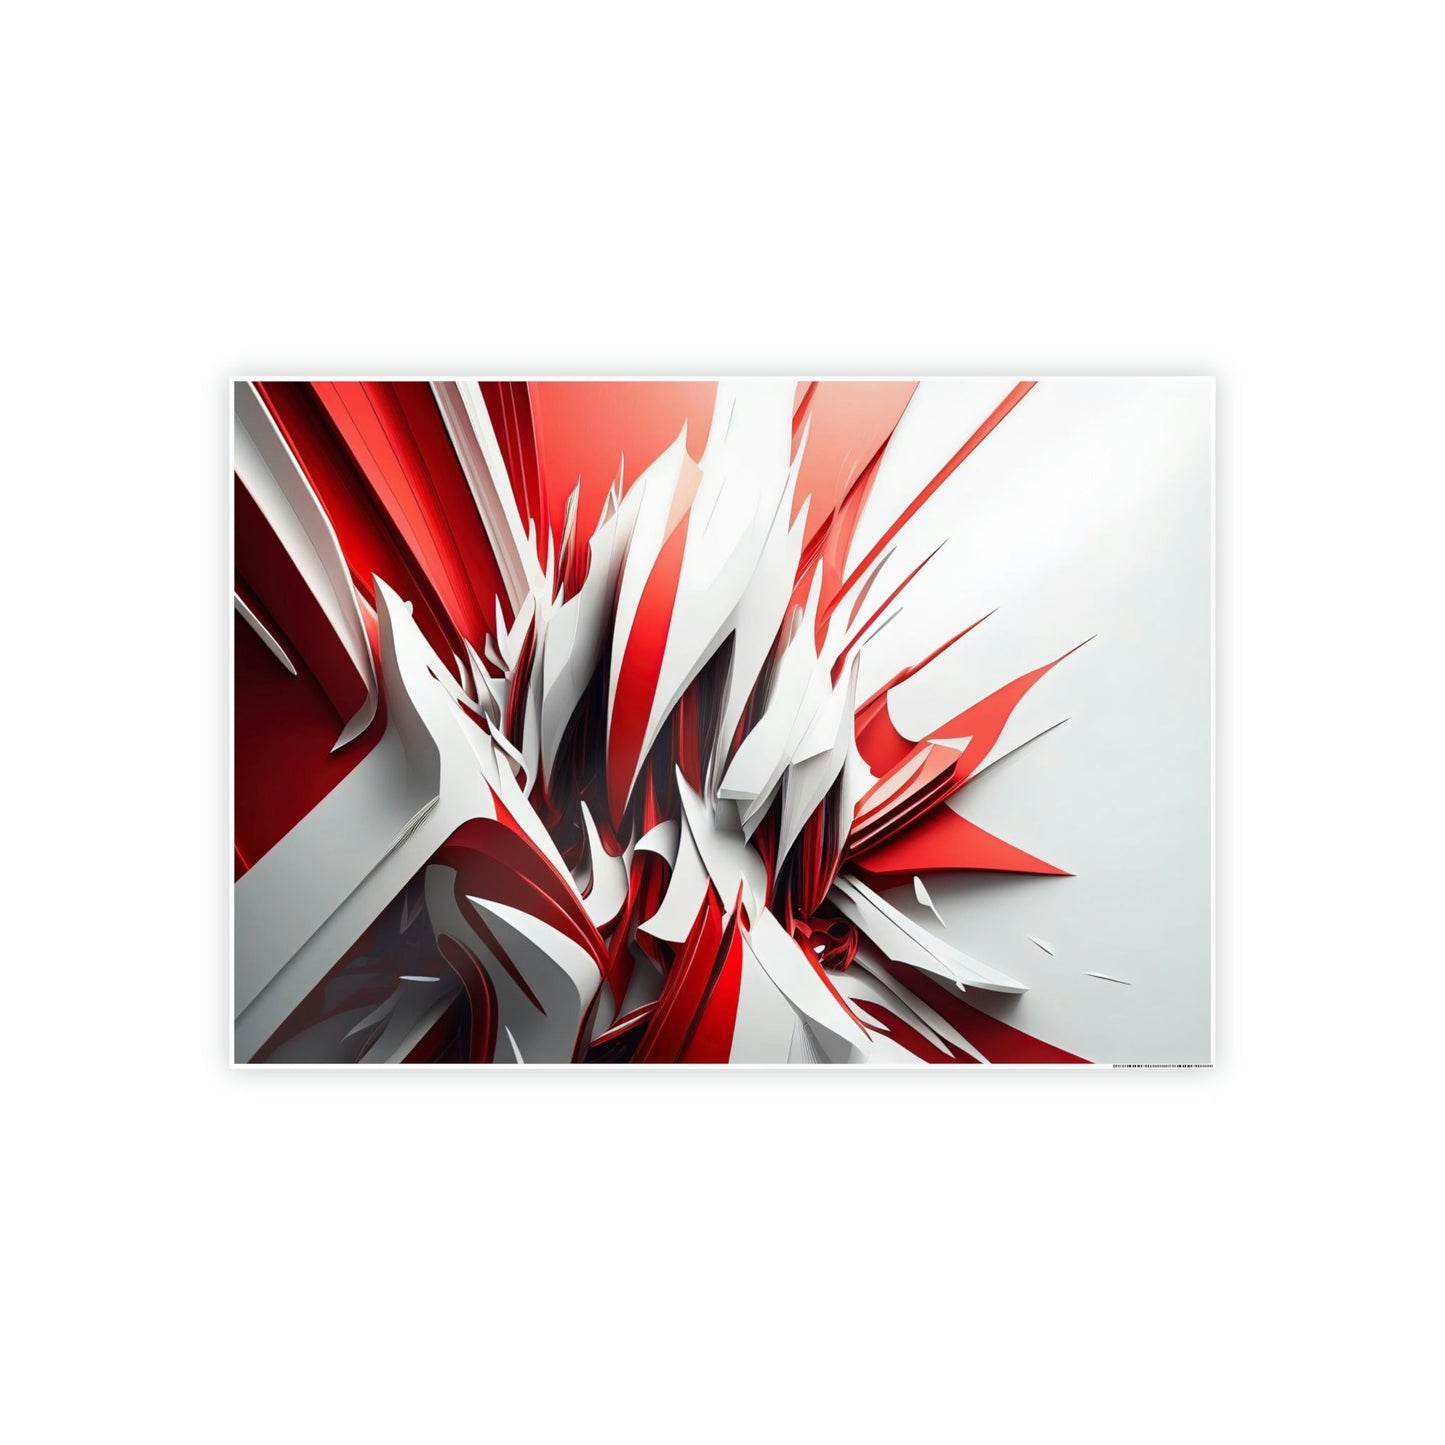 The Art of Intensity: Red Abstract Print on Canvas and Wall Art